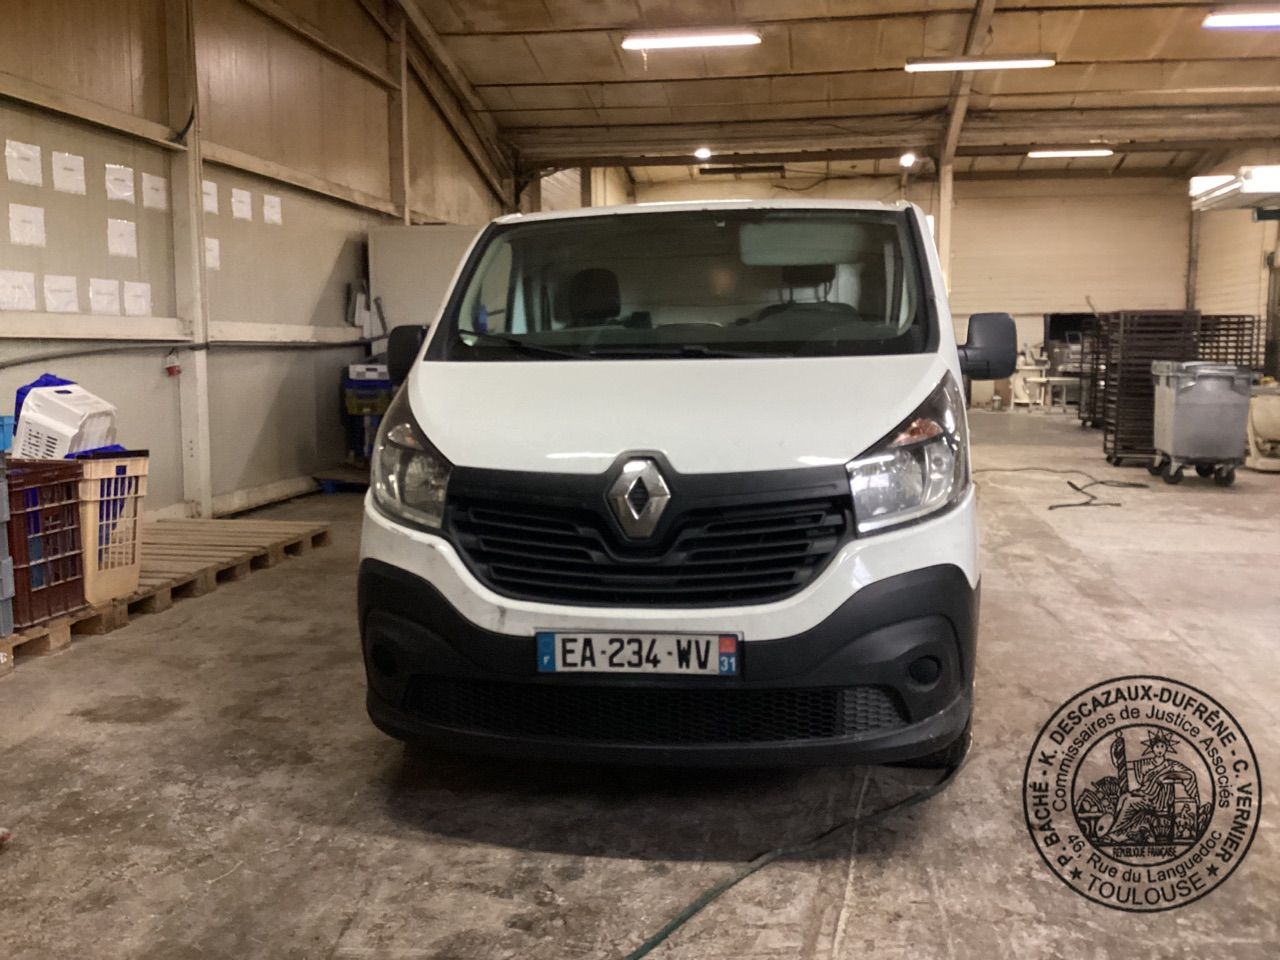 A RENAULT TRAFIC vehicle with registration number EA-234…